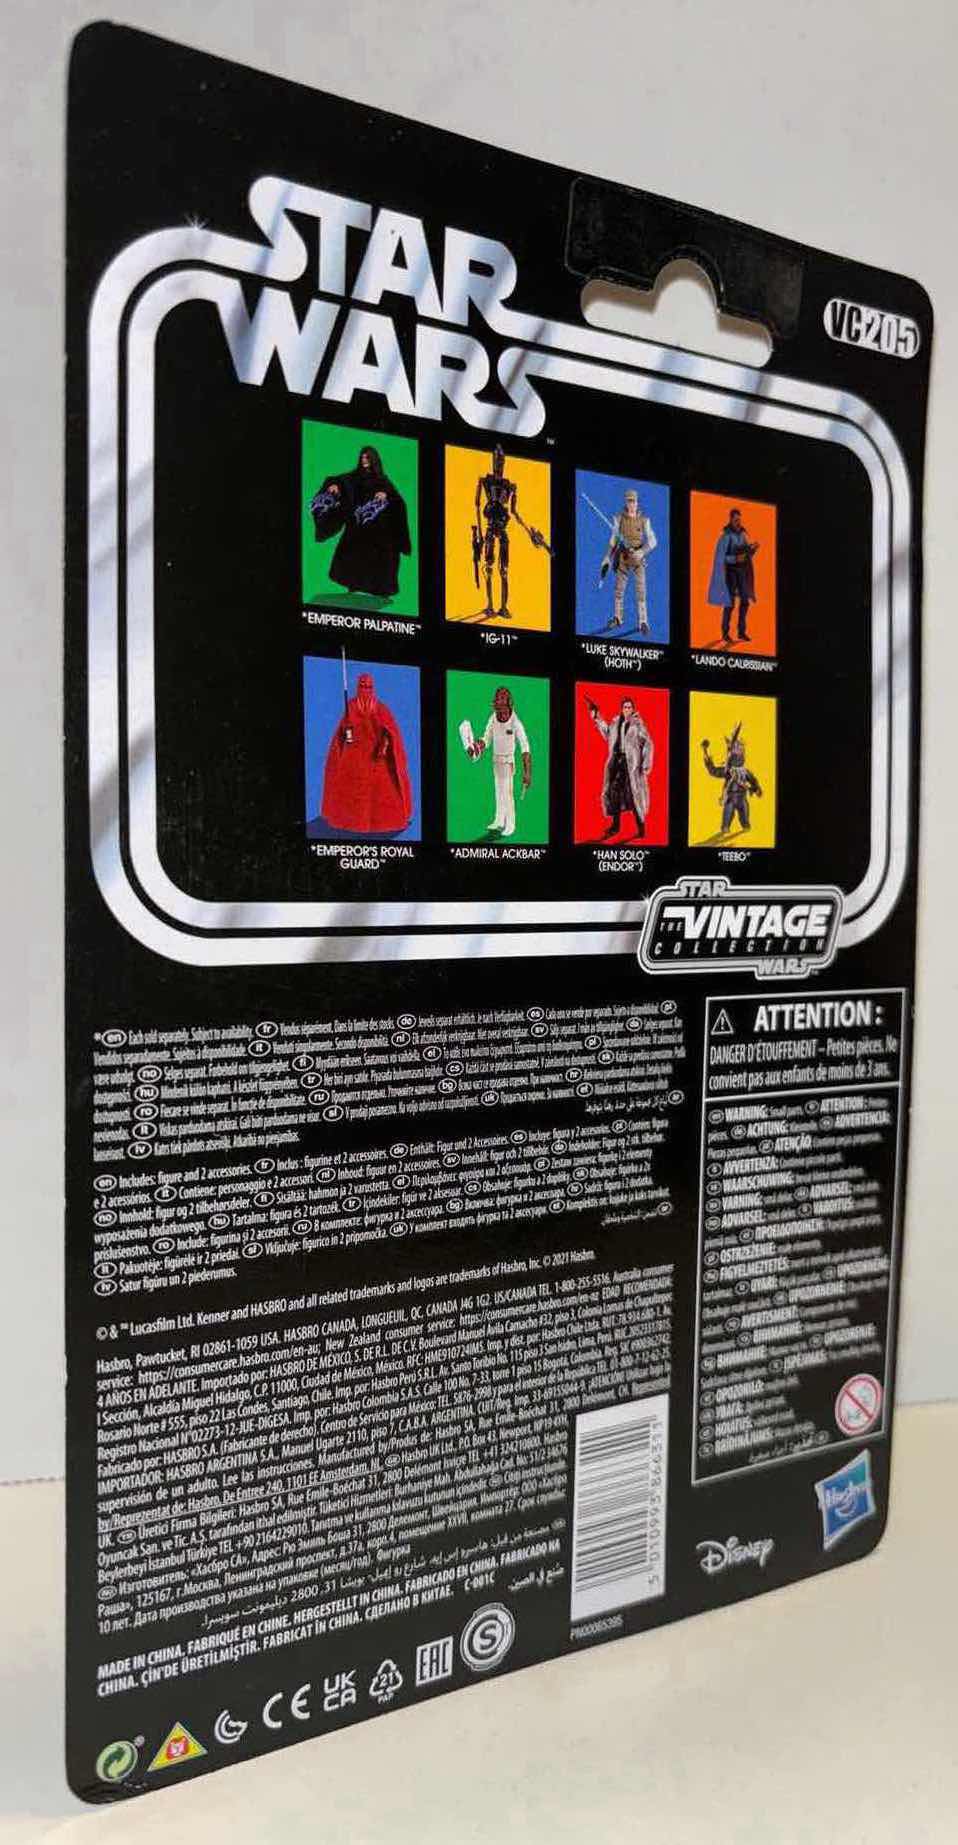 Photo 2 of NEW STAR WARS THE EMPIRE STRIKES BACK 3.75” THE VINTAGE COLLECTION ACTION FIGURE & ACCESSORIES, “LANDO CALRISSIAN” (1)